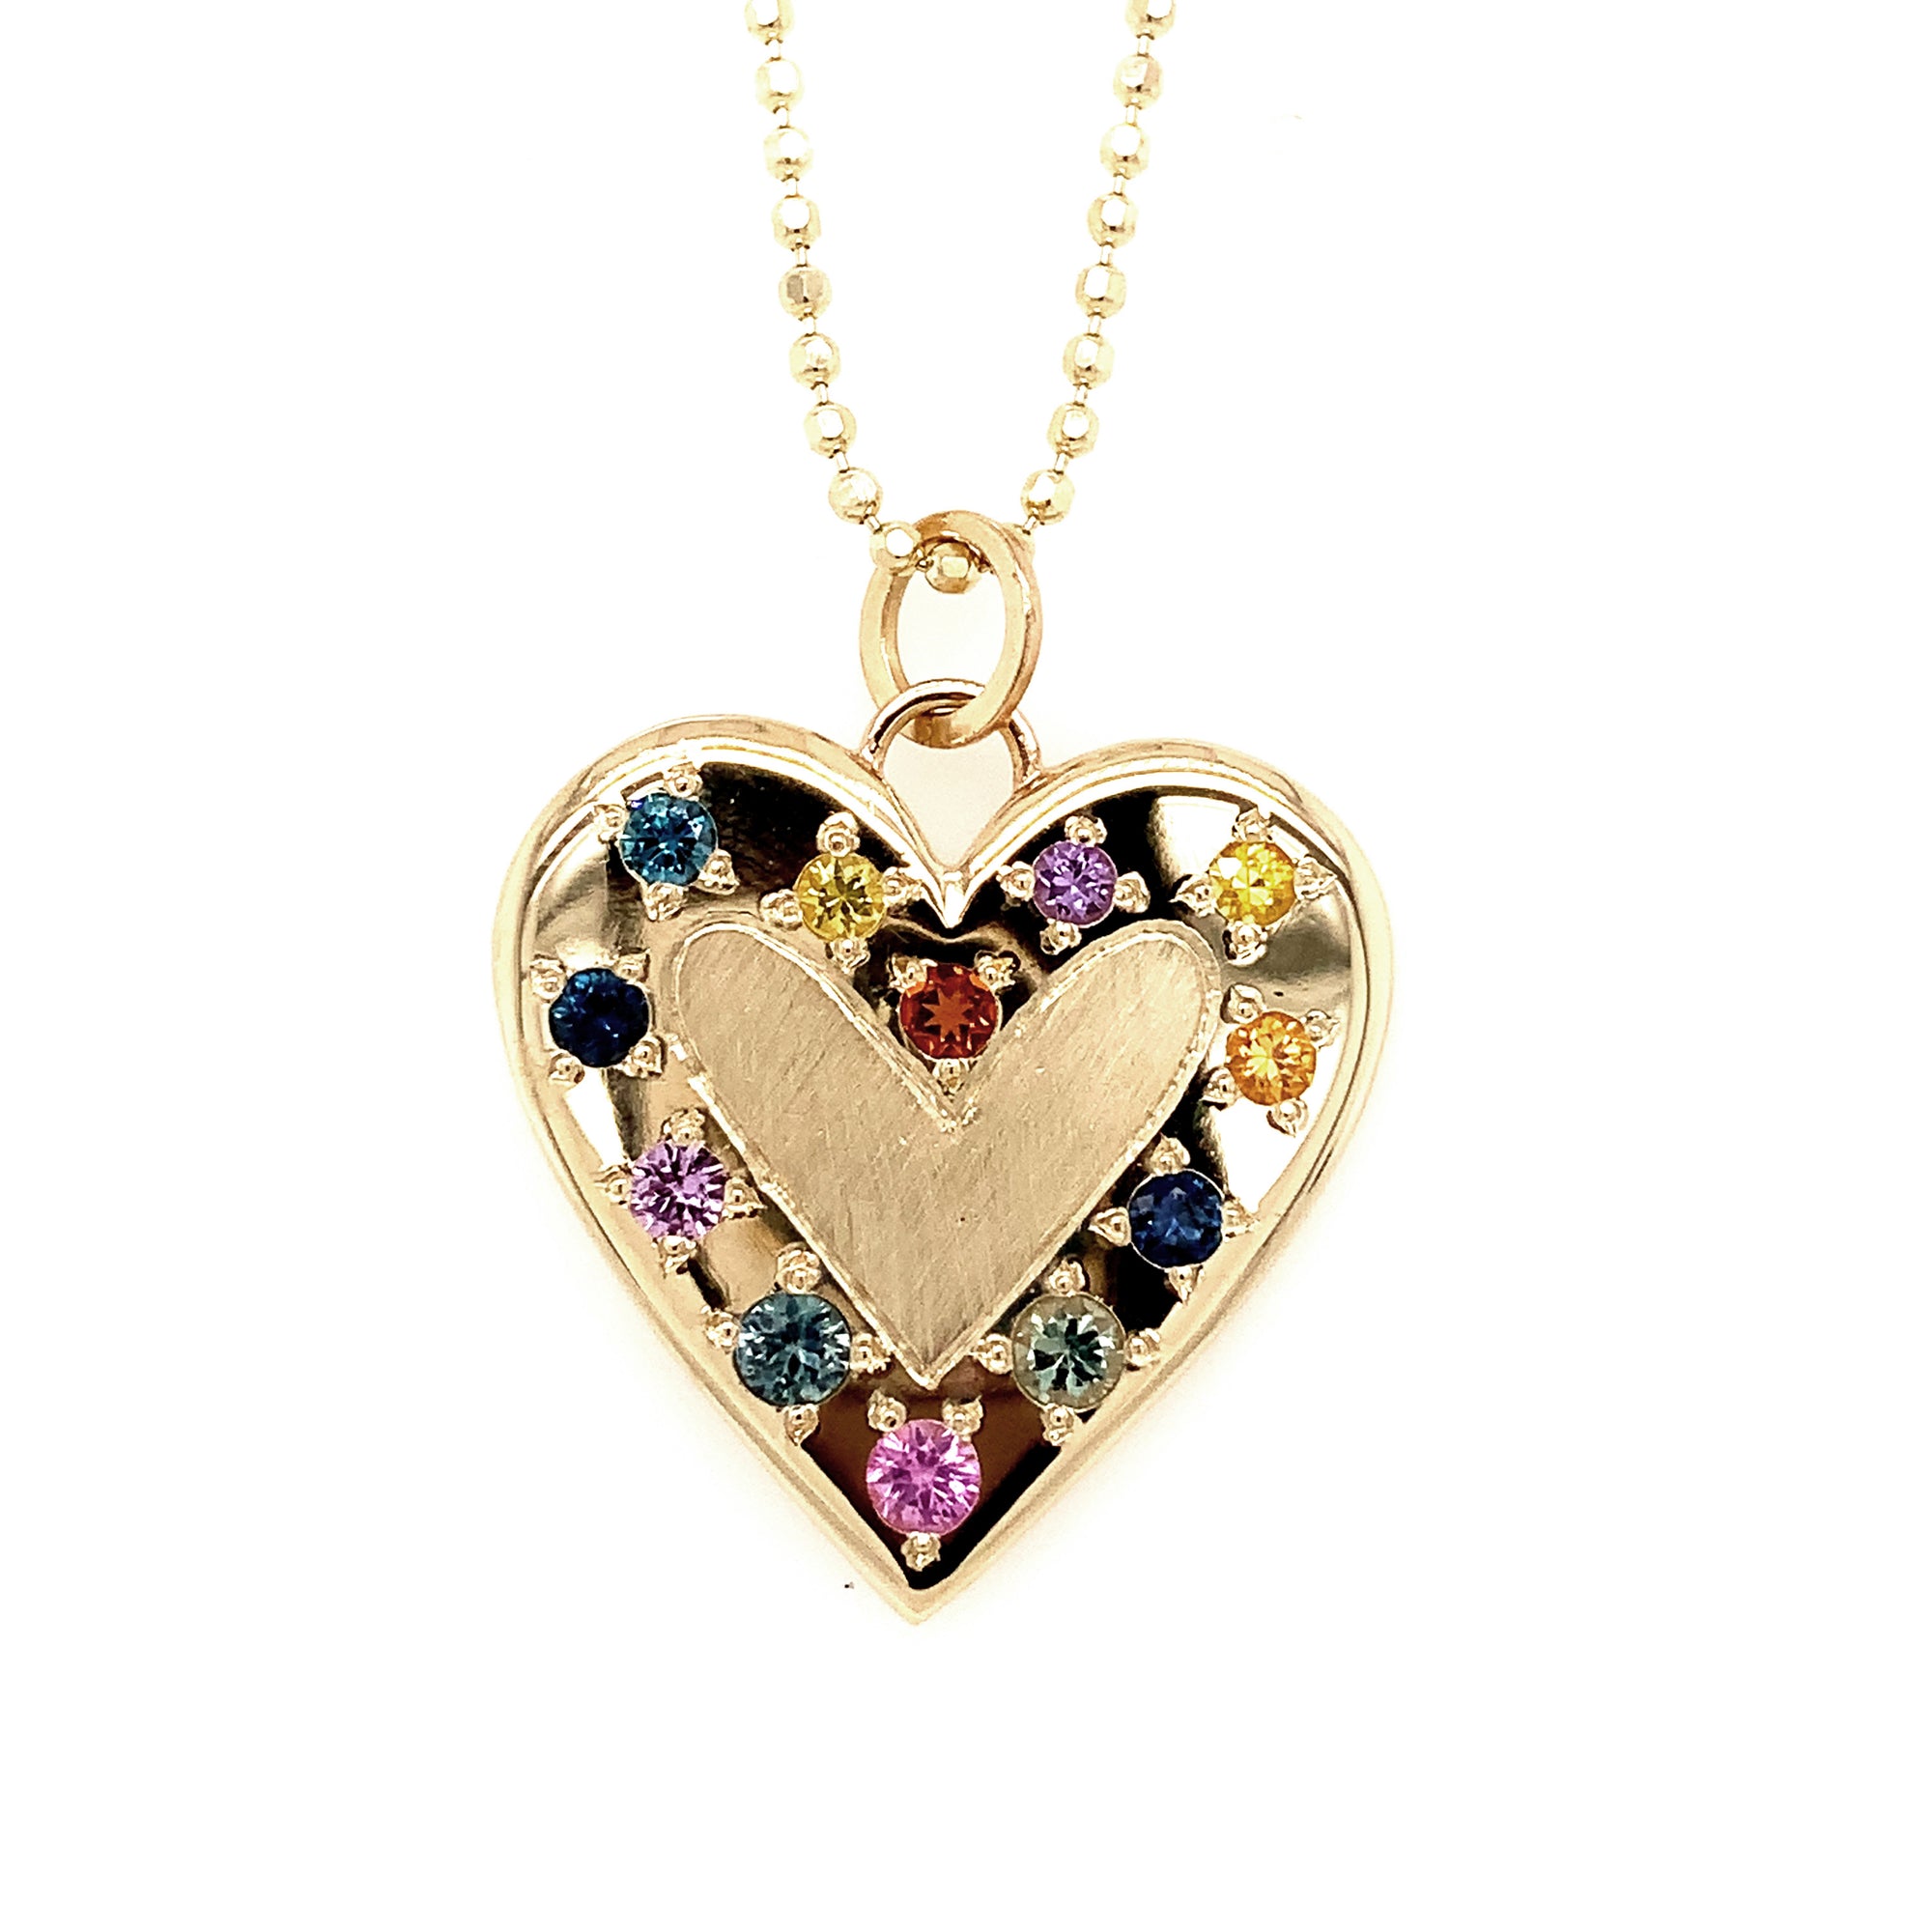 14k yellow gold large heart pendant of complimenting shiny and satin finish with outer edge of mixed color sapphires